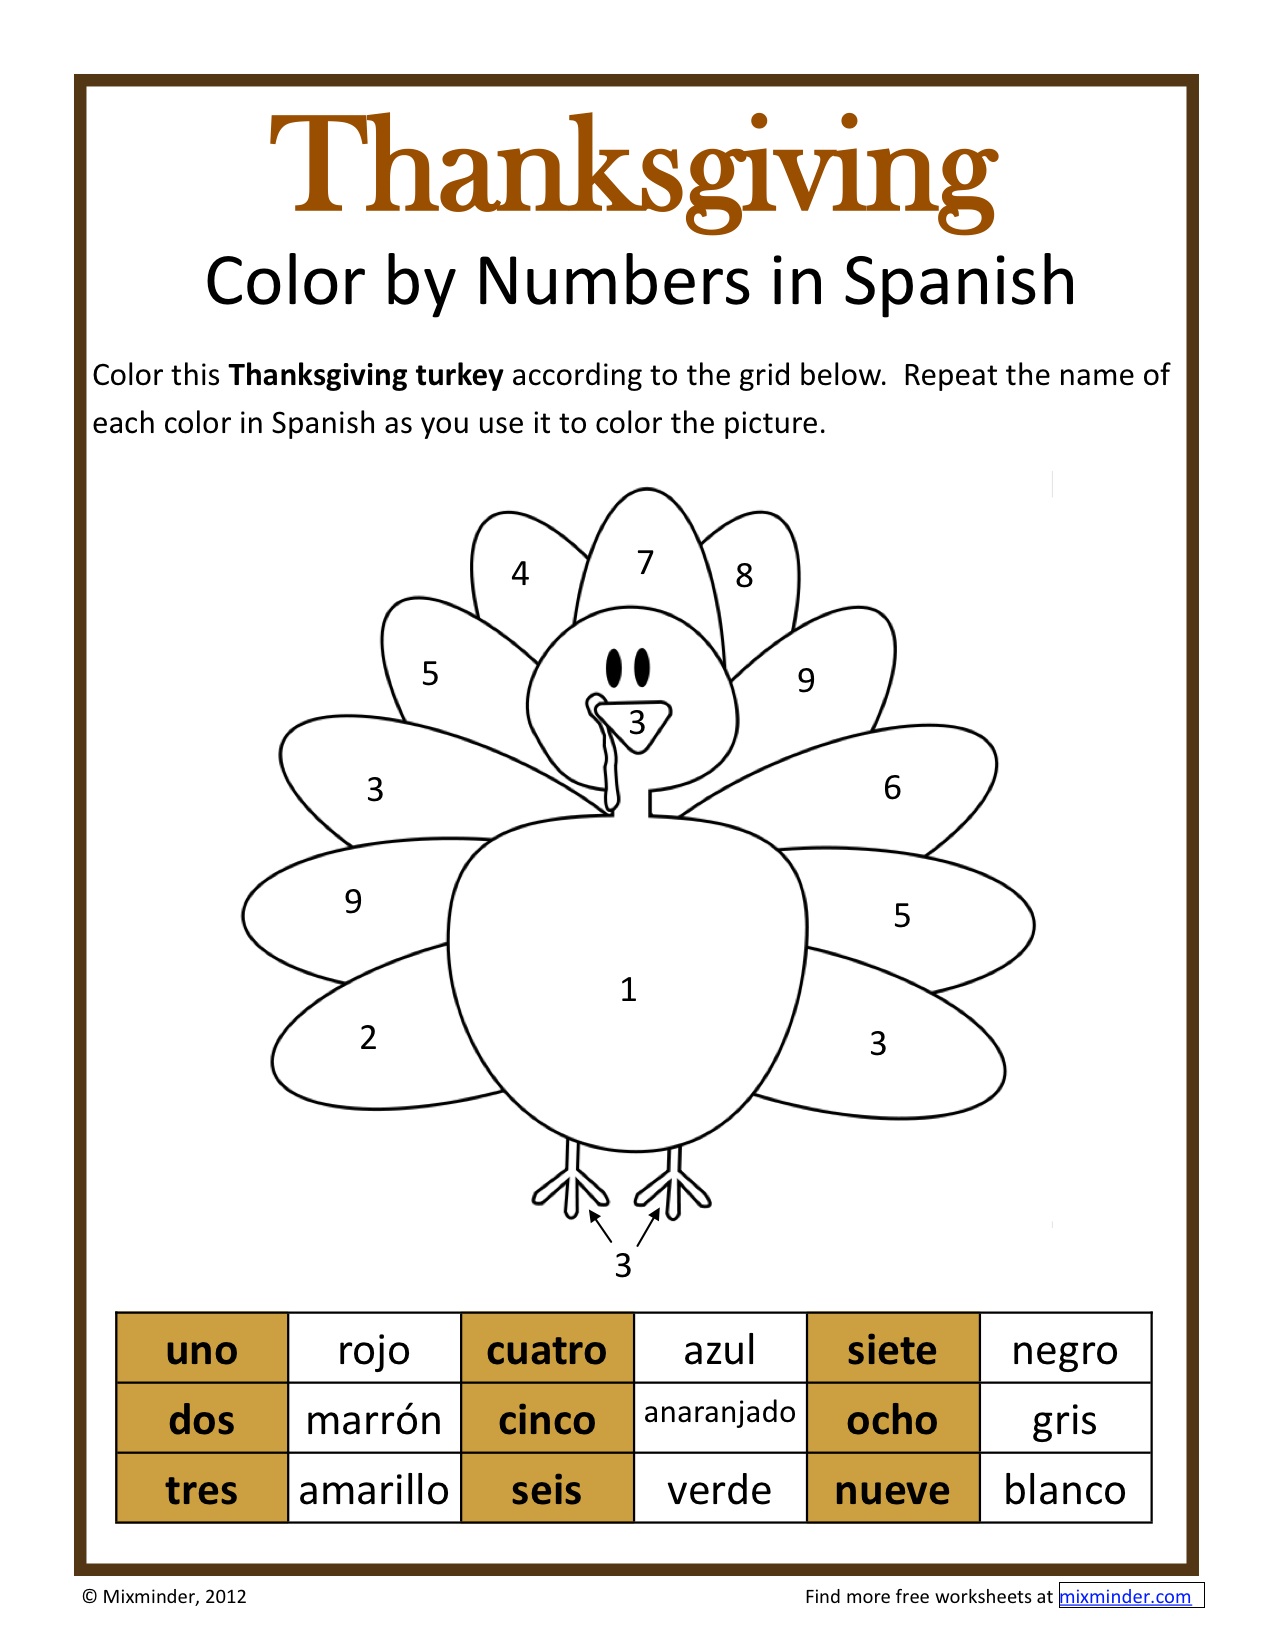 Thanksgiving Color by Numbers in Spanish